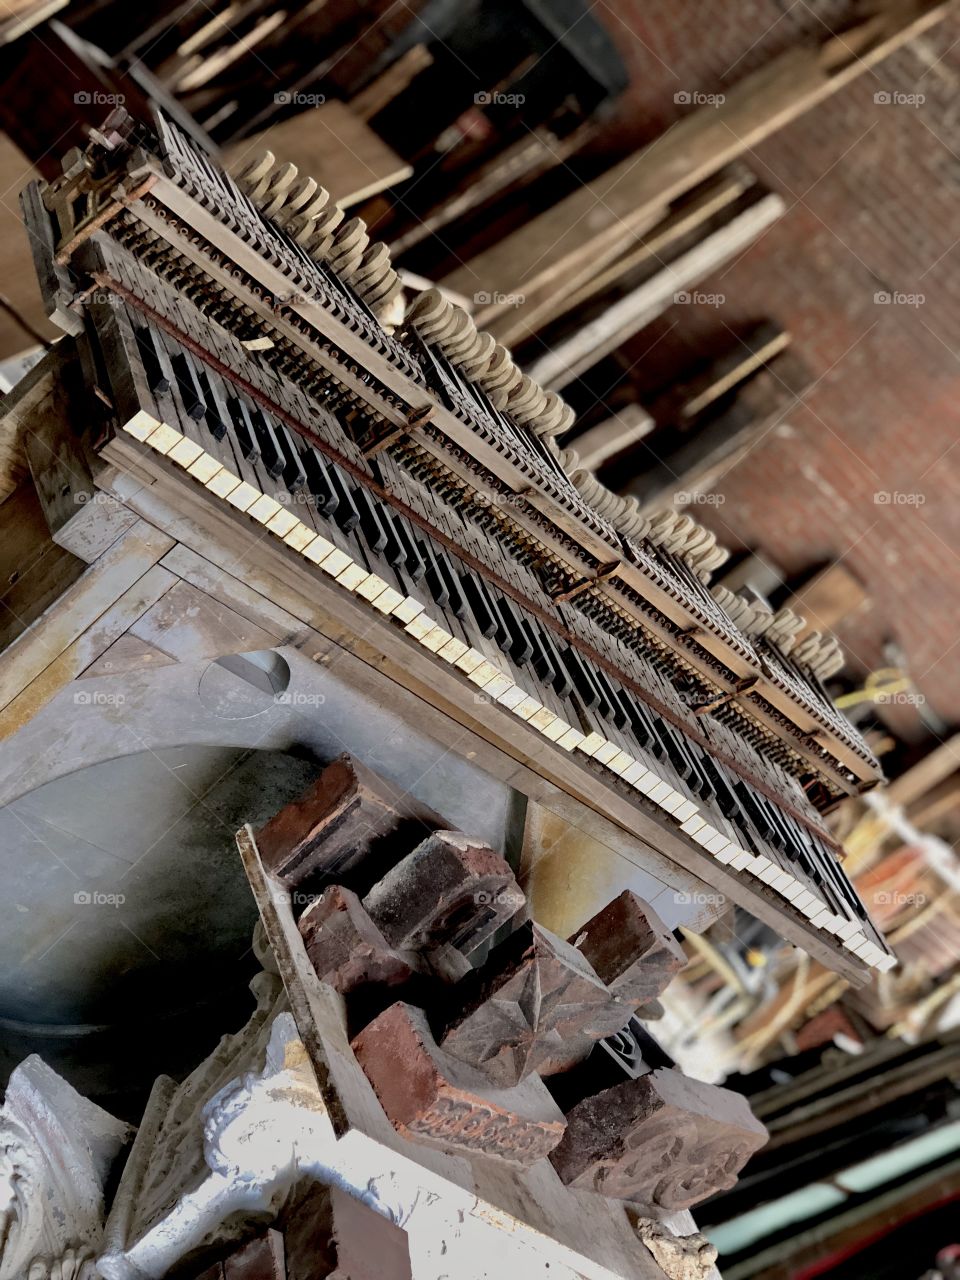 Vintage piano in warehouse full of rescued items from pre-demolished buildings